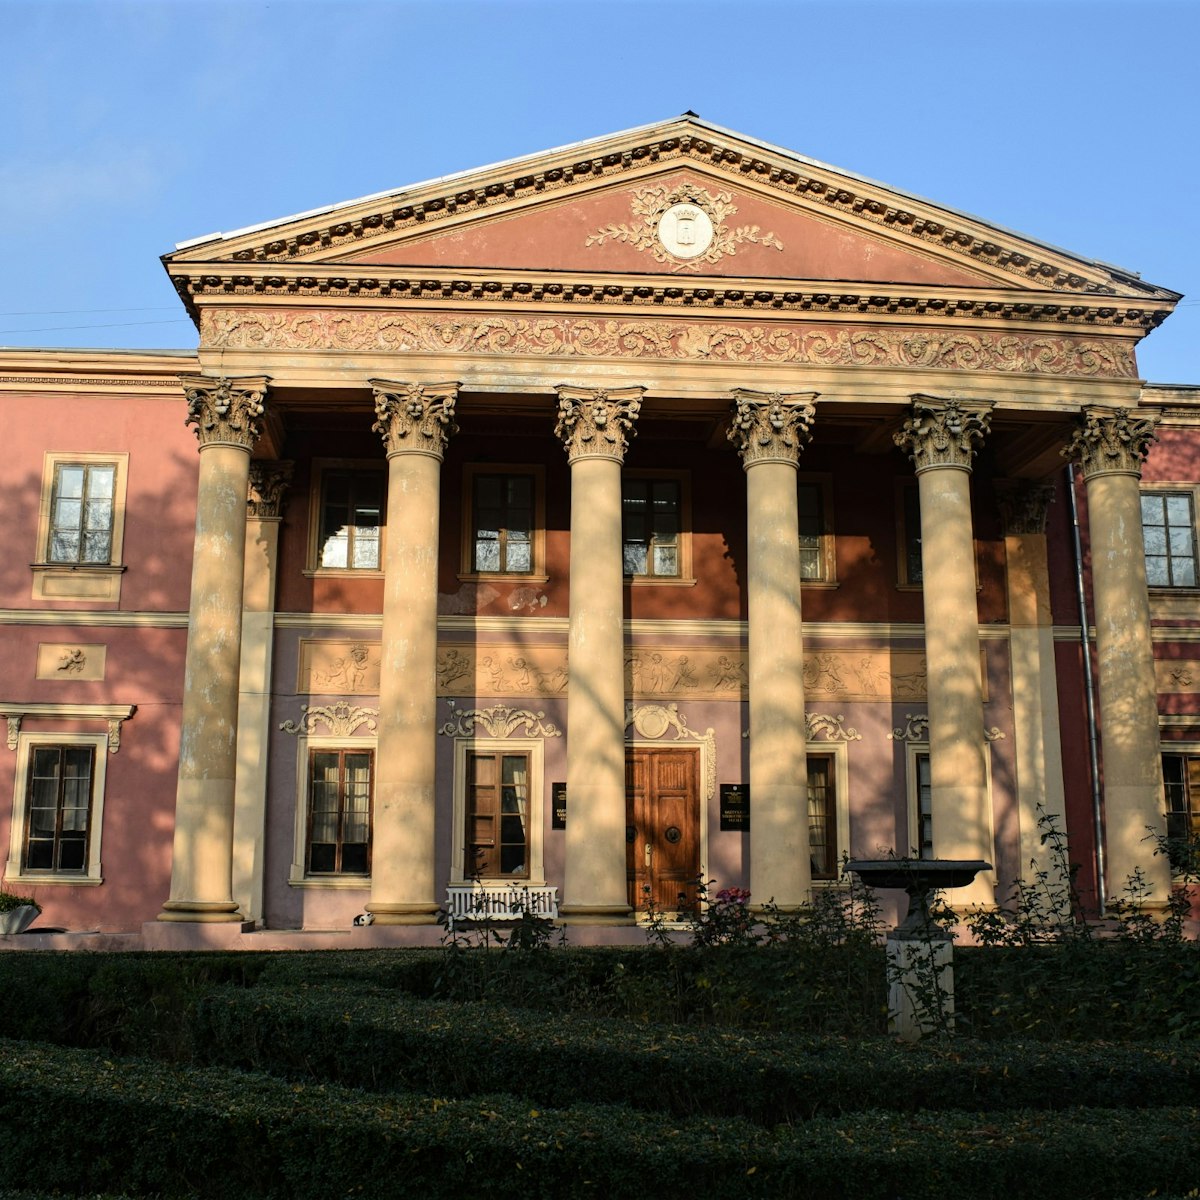 The Odesa Fine Arts Museum, located in a former palace